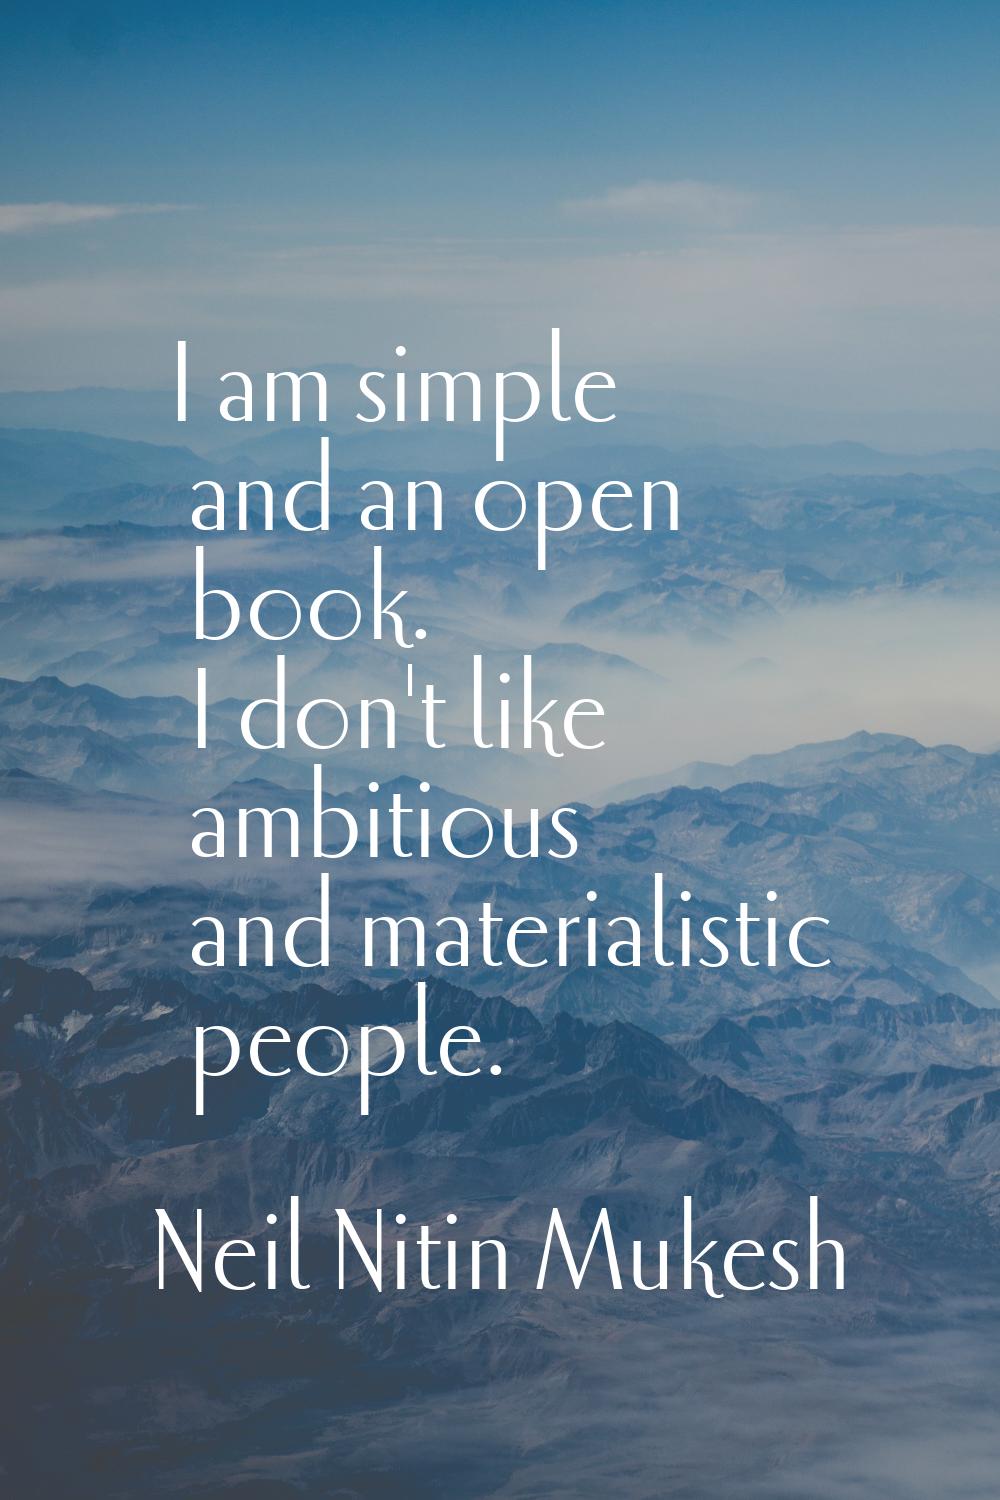 I am simple and an open book. I don't like ambitious and materialistic people.